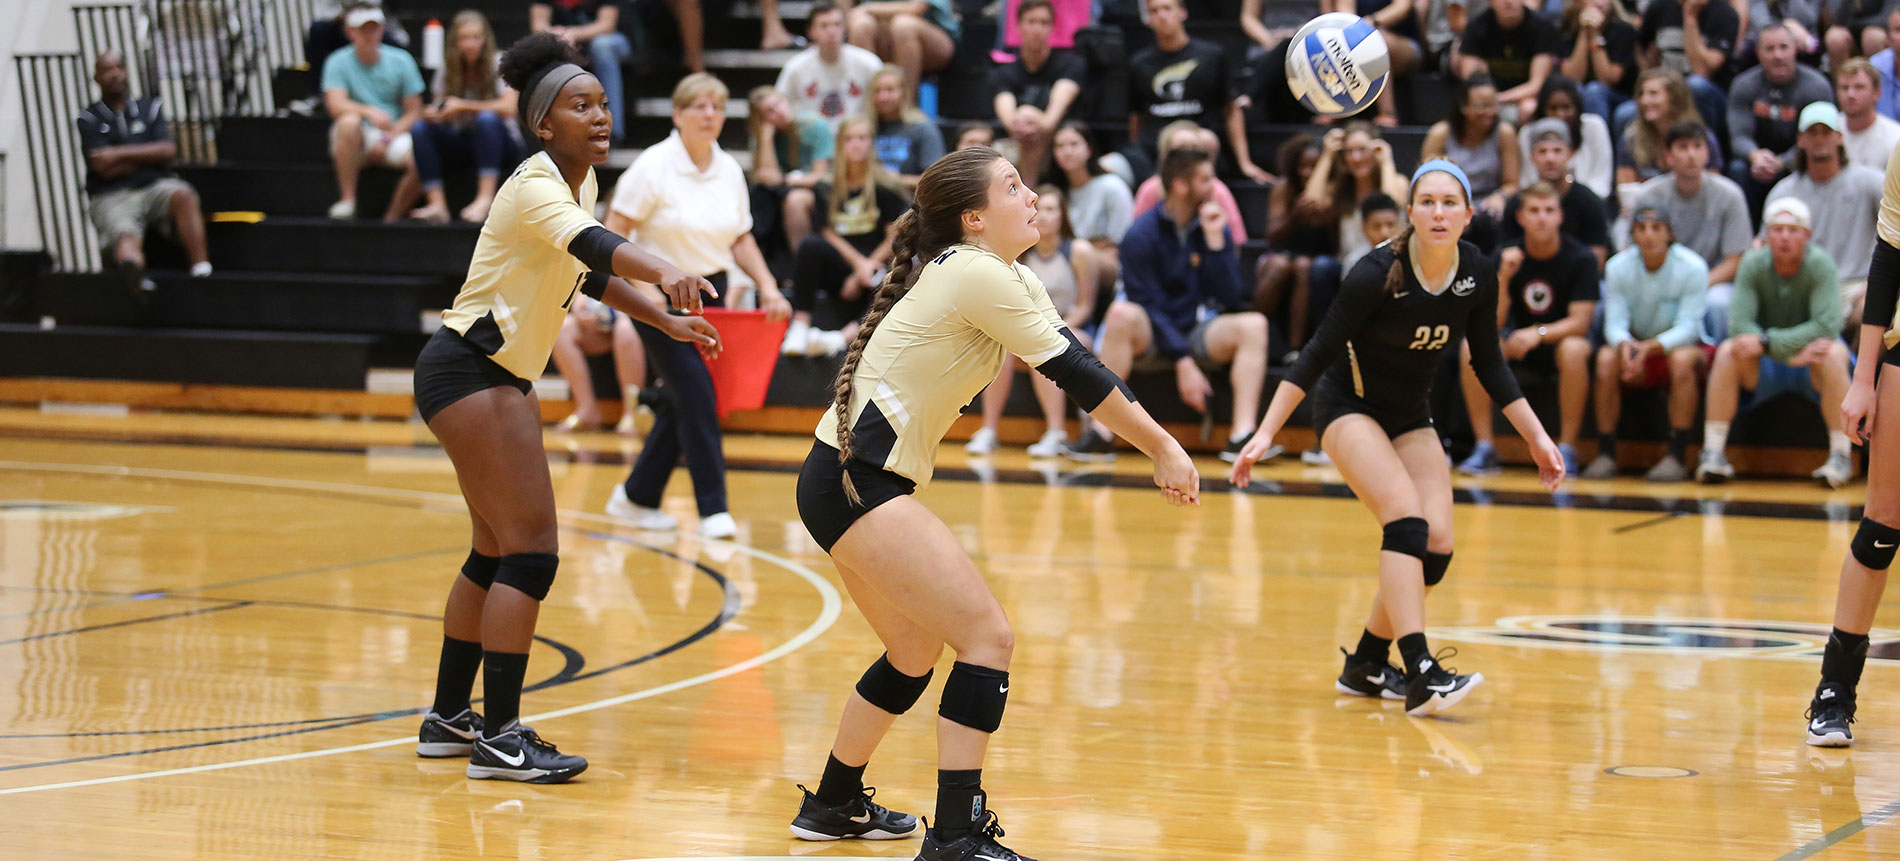 Volleyball Continues Homestand by Playing Host to Catawba